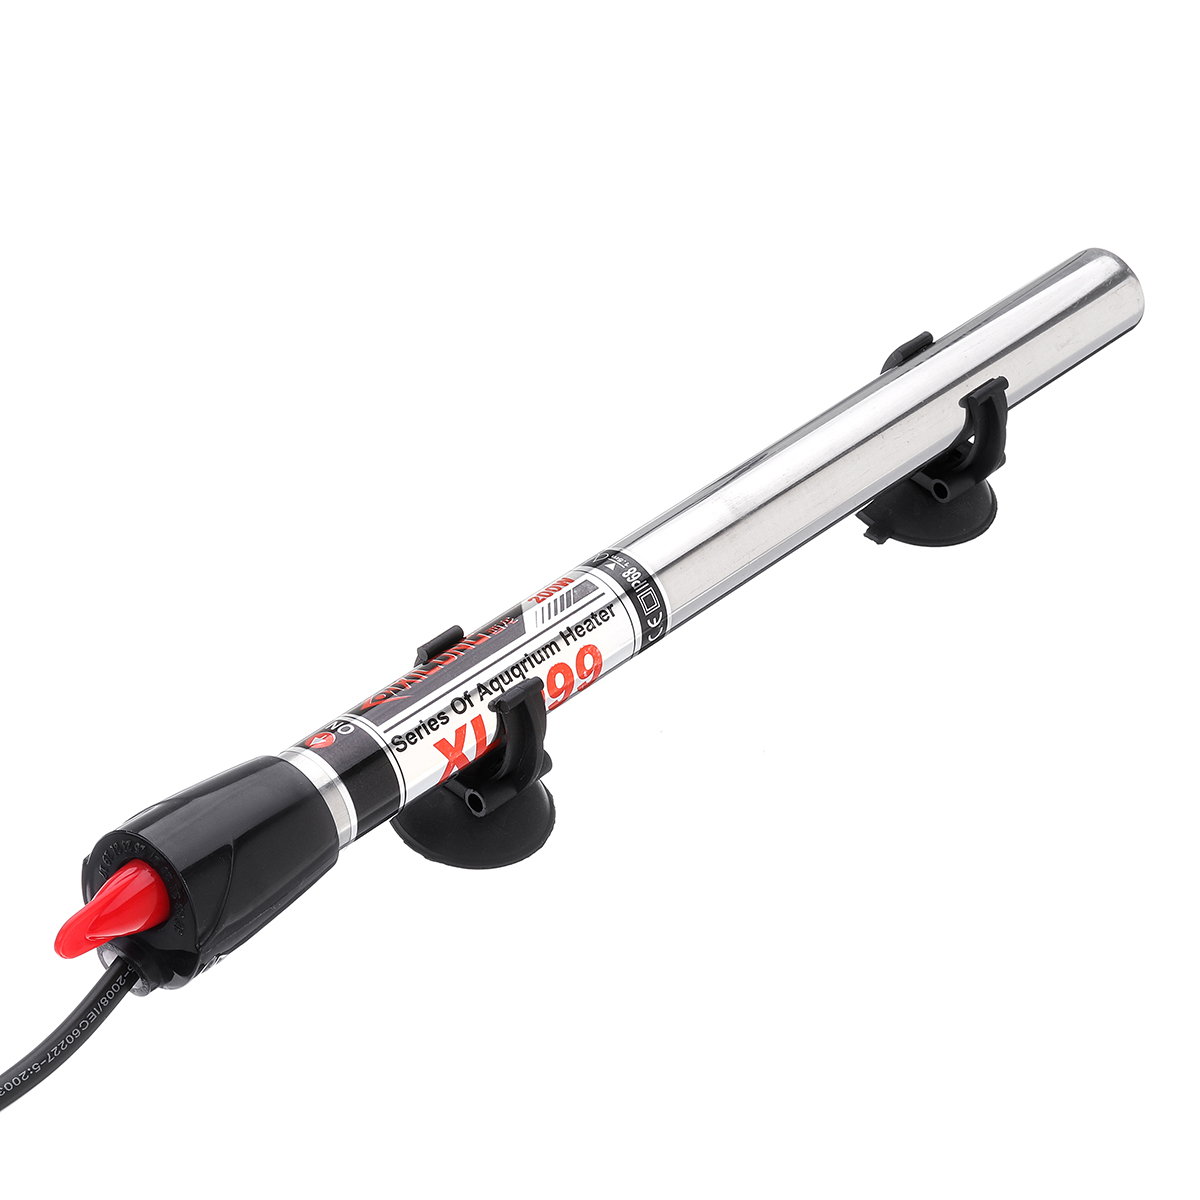 100W200W-Submersible-Stainless-Steel-Water-Heater-Rod-Aquarium-Fish-Tank-220V-1478945-7